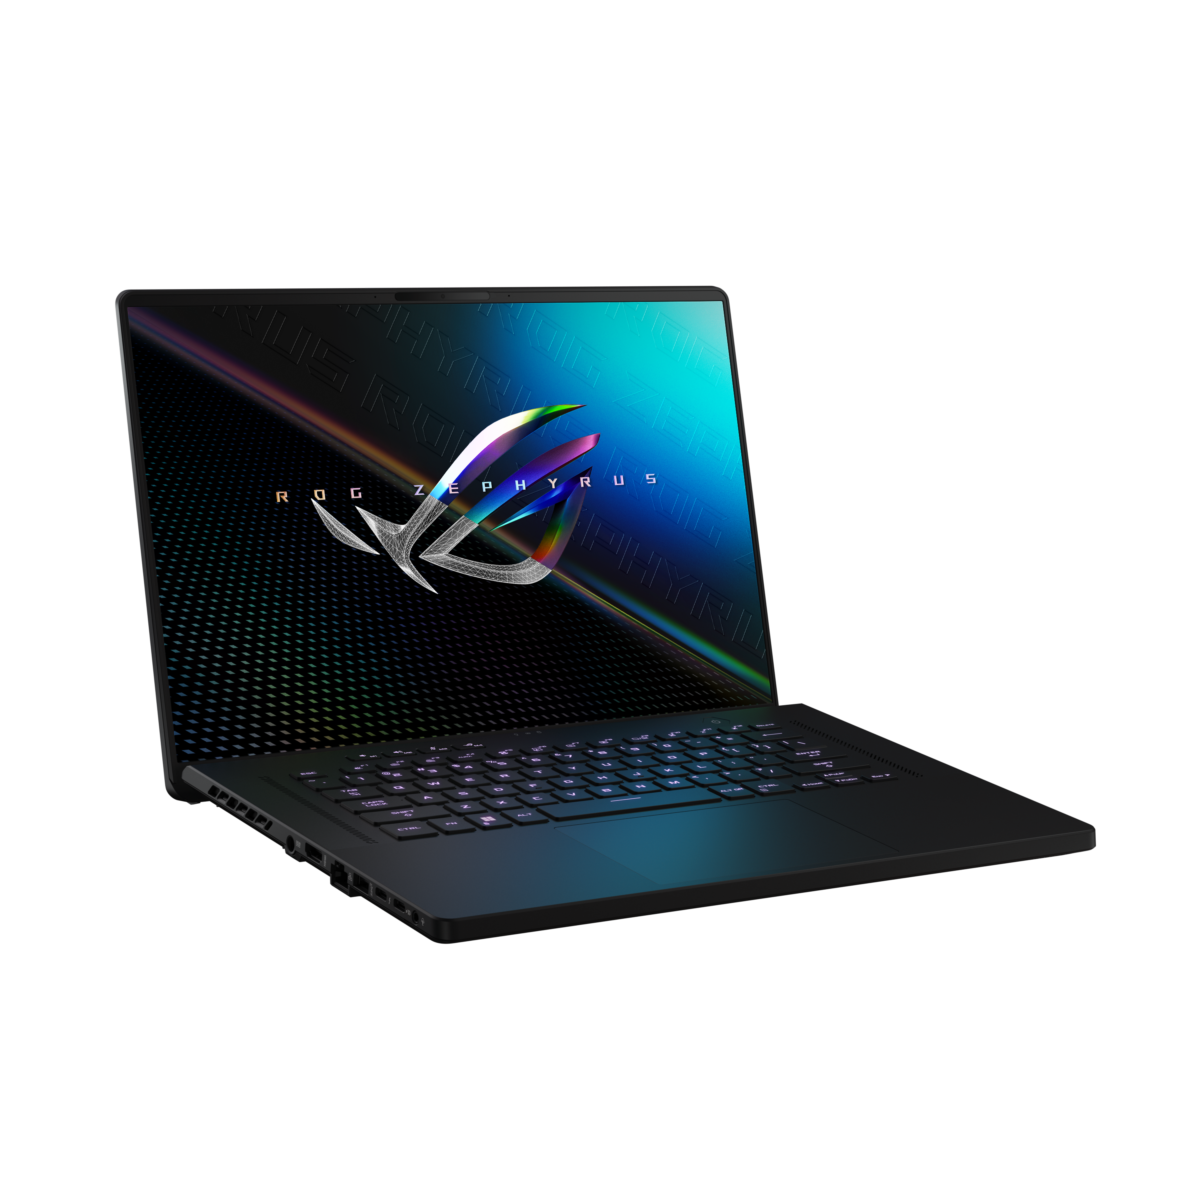 ROG Launches New Gaming Laptops with Latest CPU/GPU -